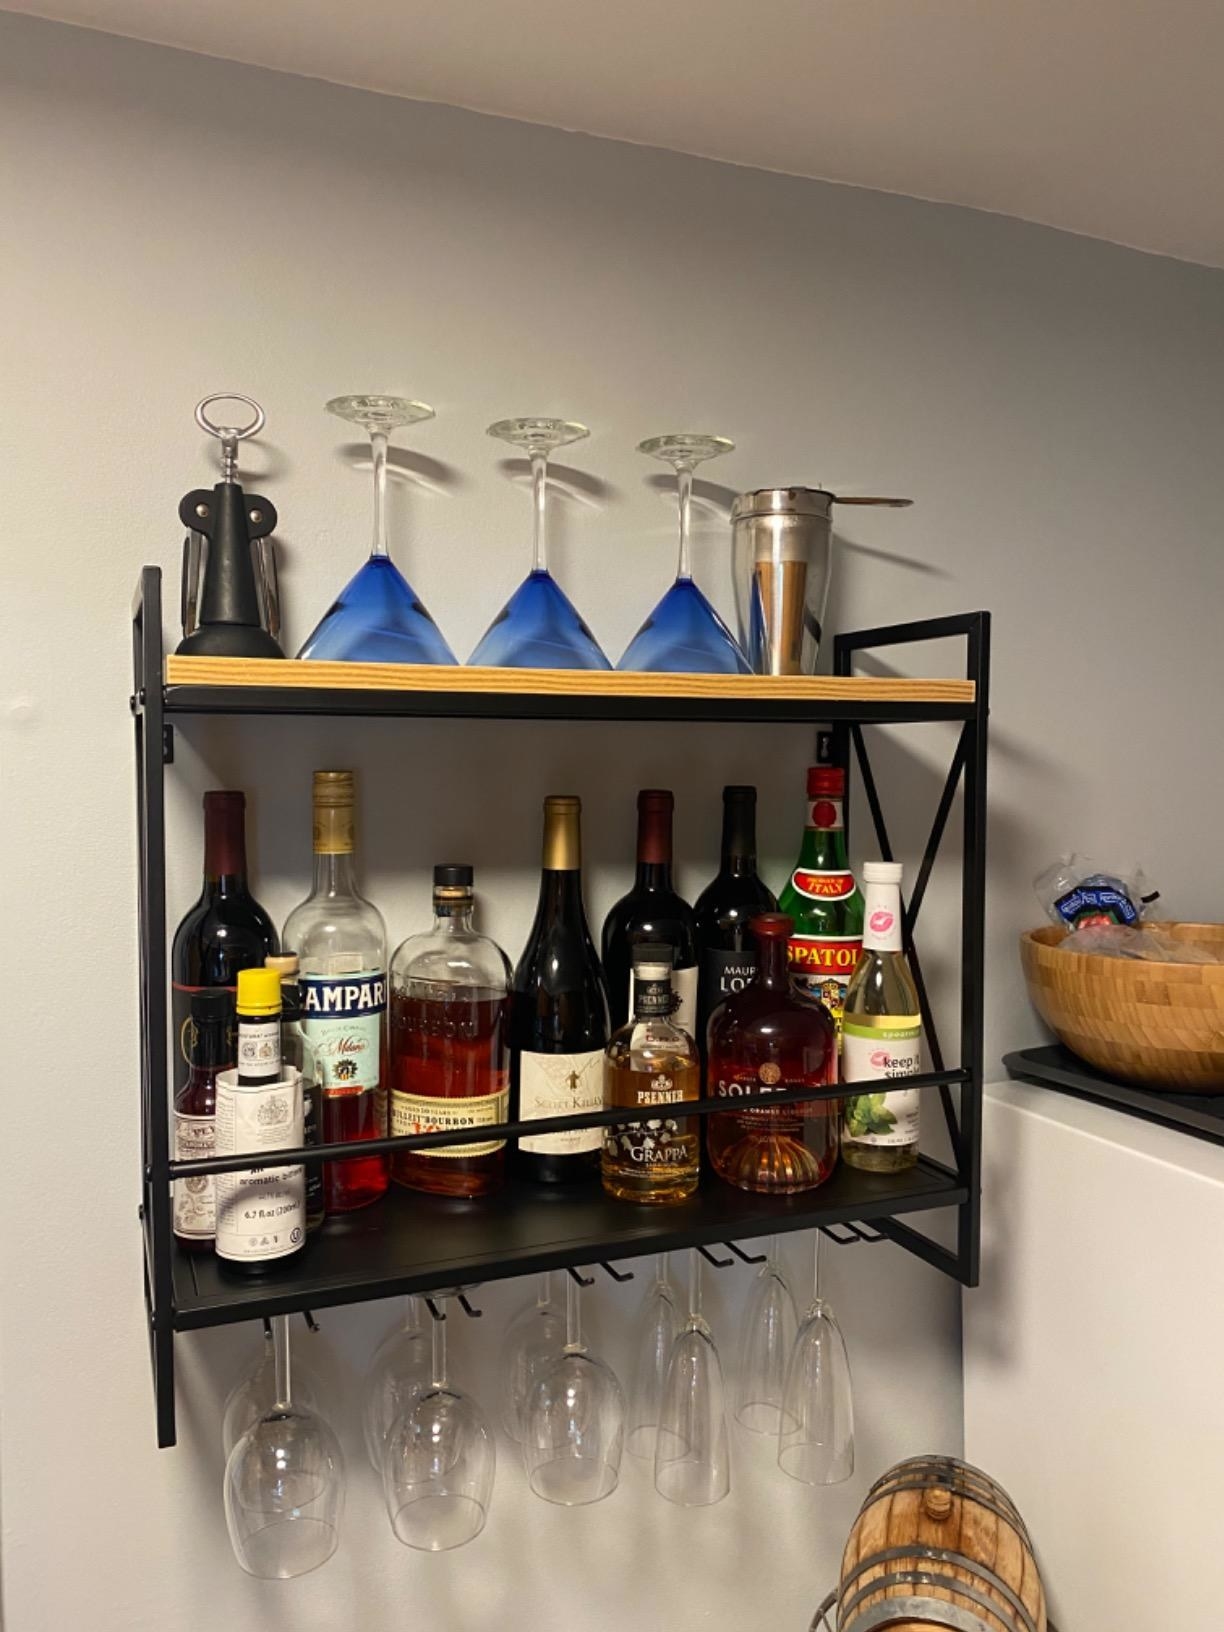 A reviewer photo of the wine rack, which has a flat shelf on top, a wine shelf with a safety bar in the middle, and a rack to hang wine glasses from on the bottom